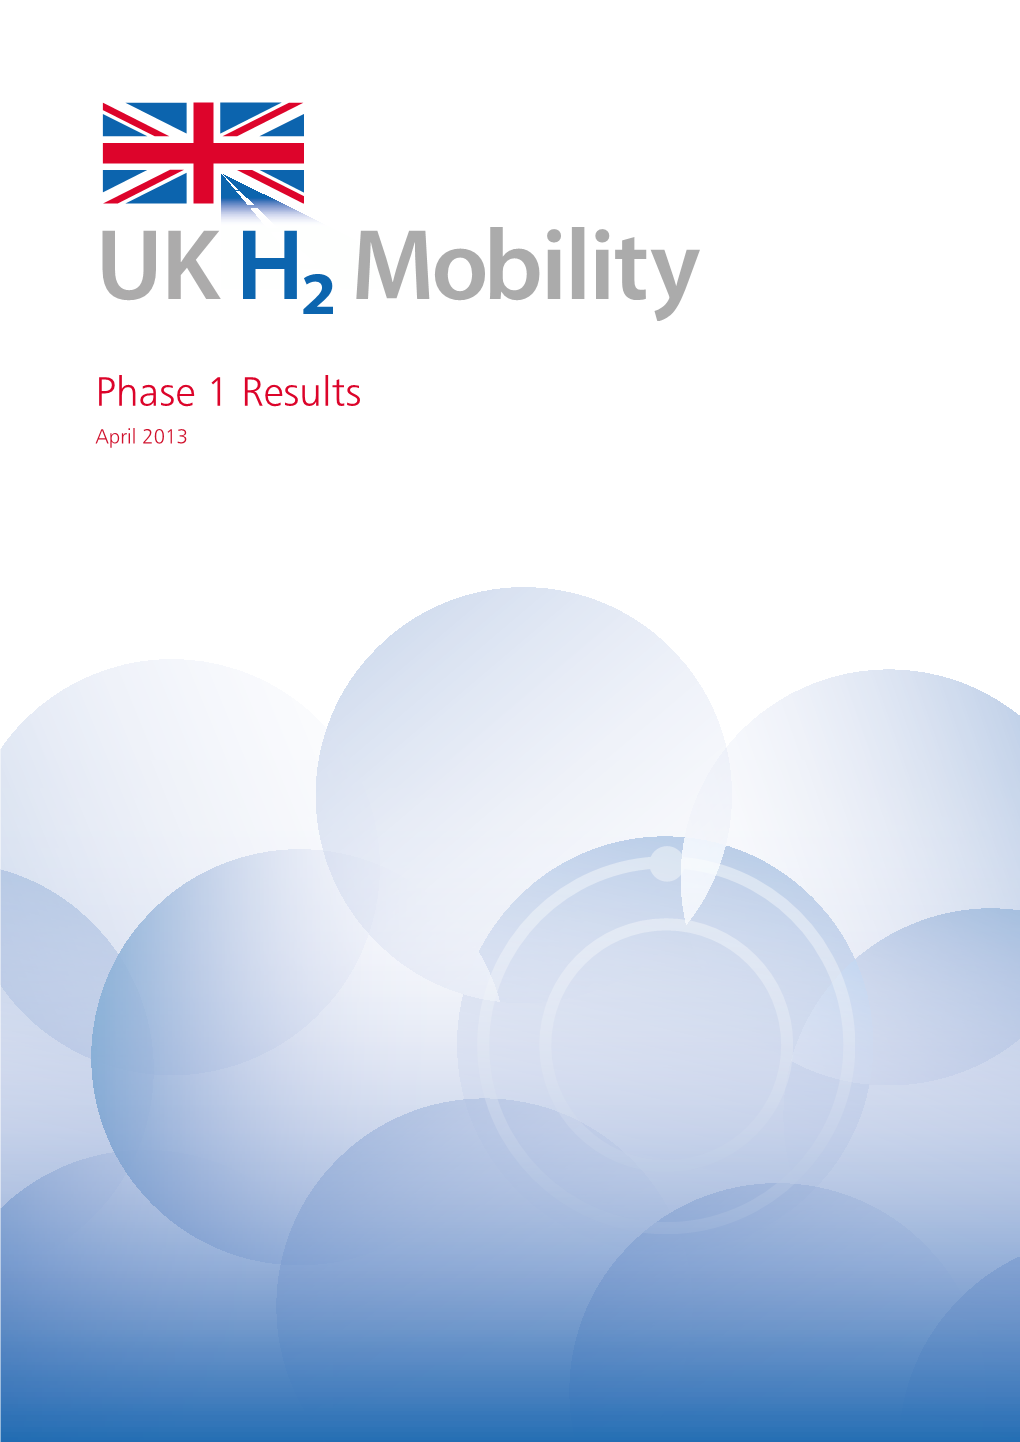 UK H2 Mobility: Phase 1 Results